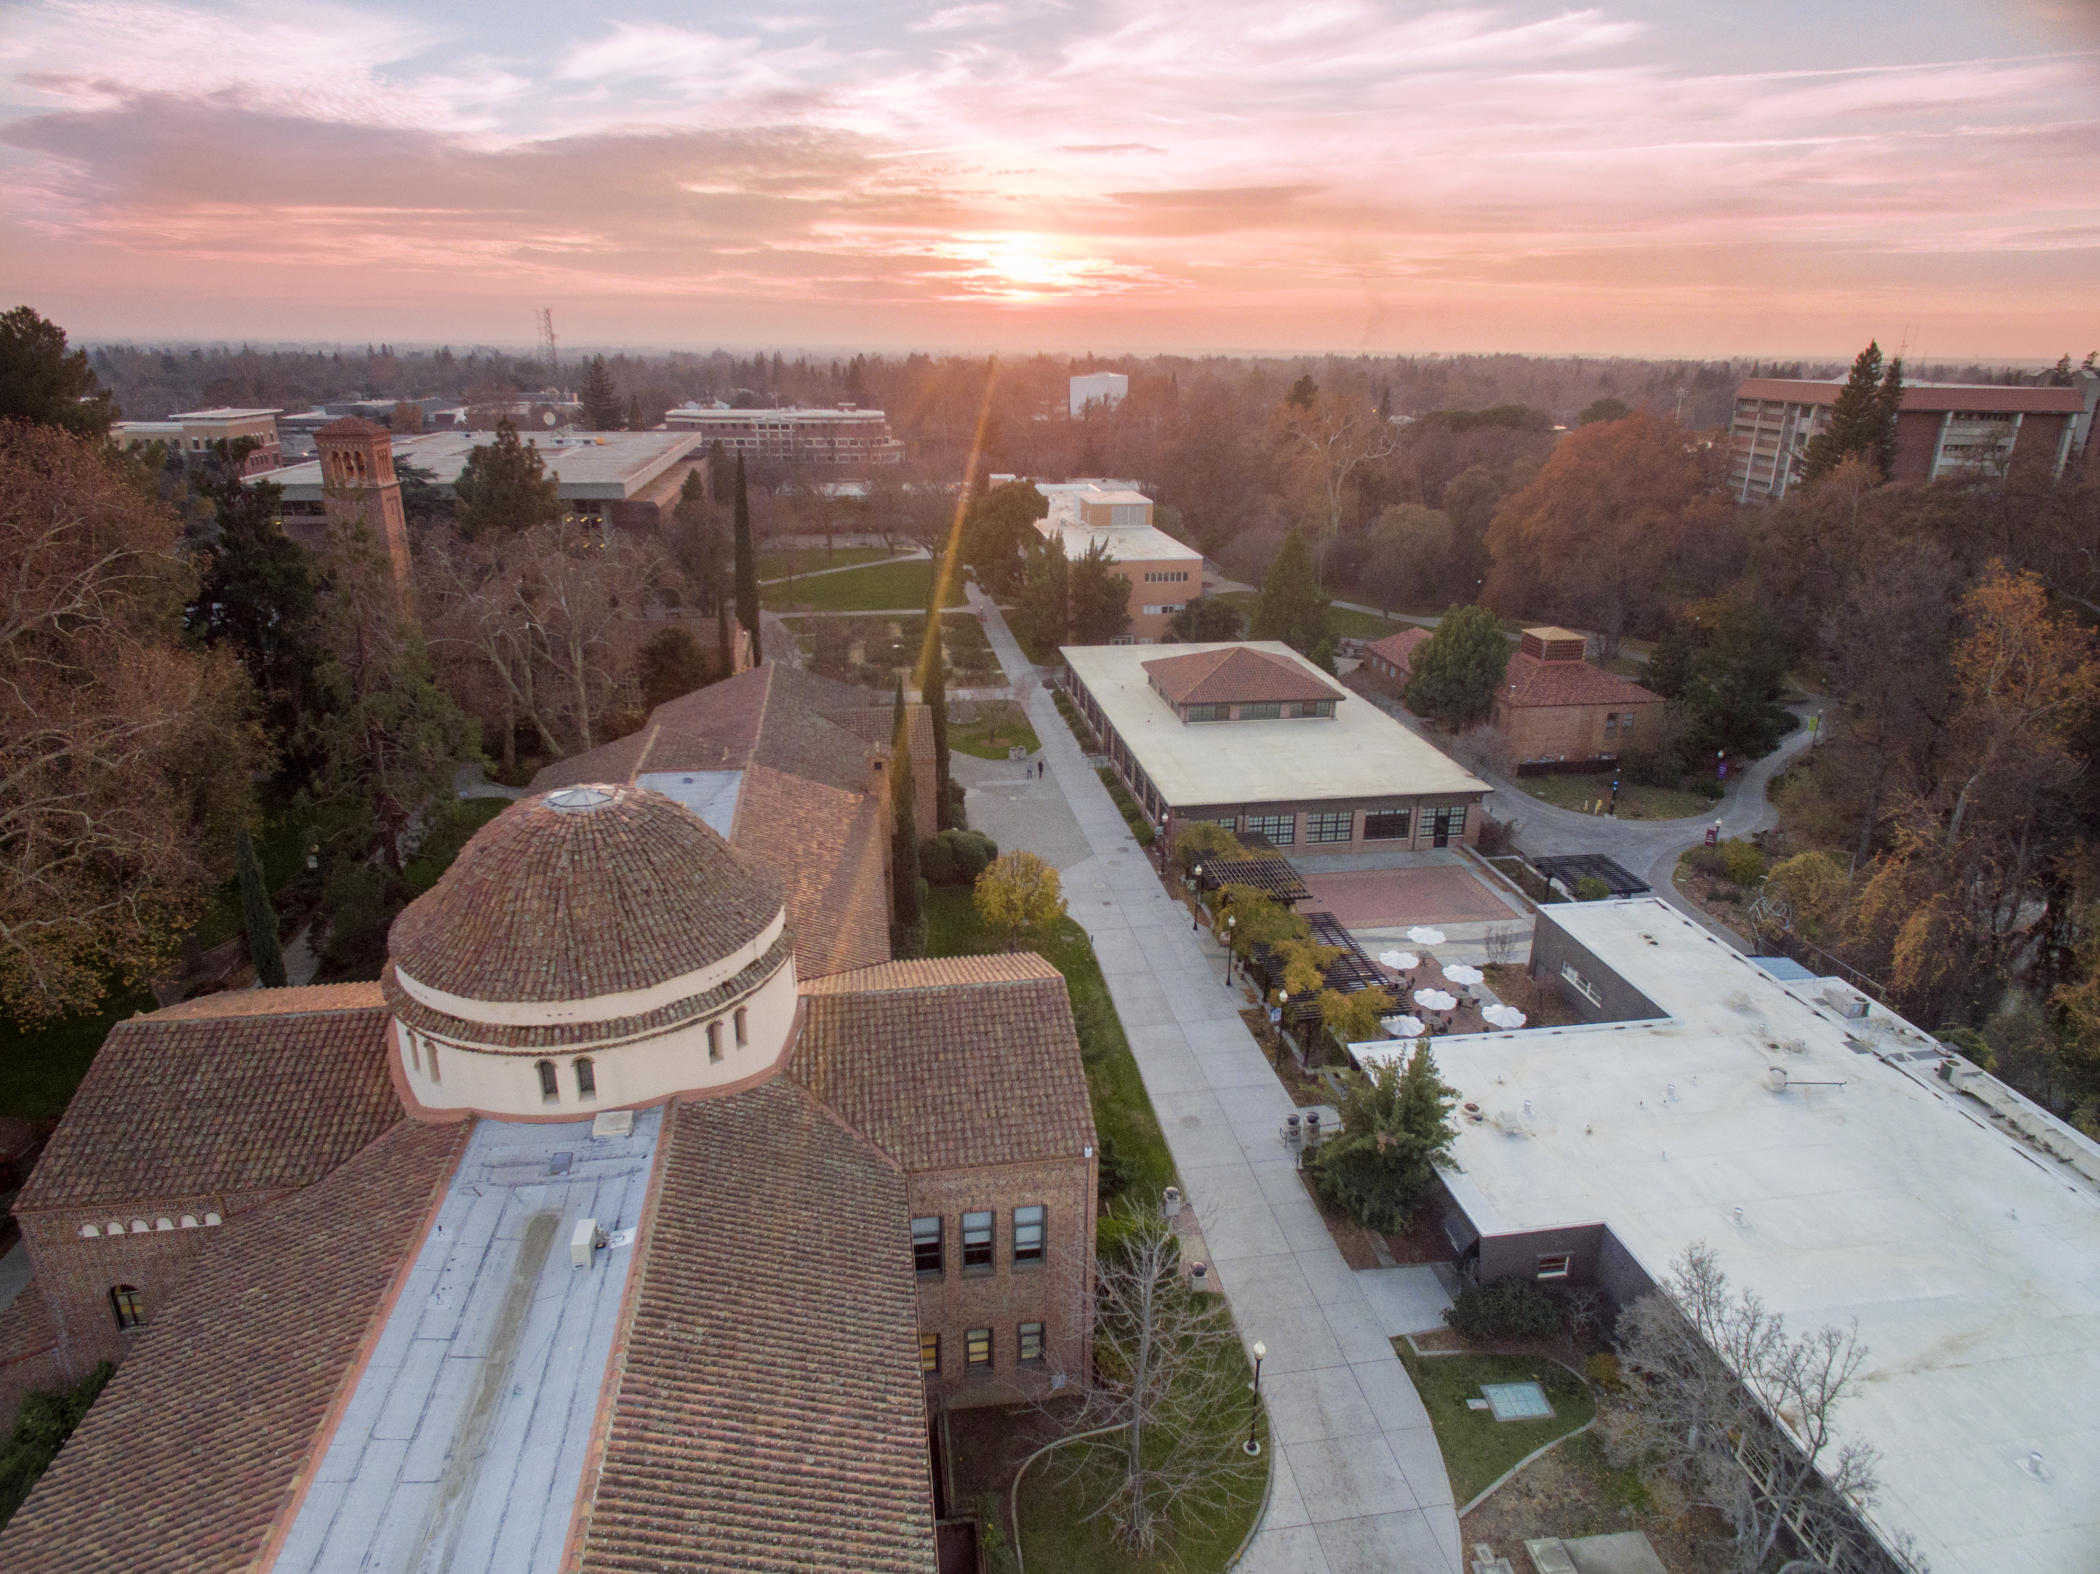 The sun sets over the Chico State campus on a winter afternoon.